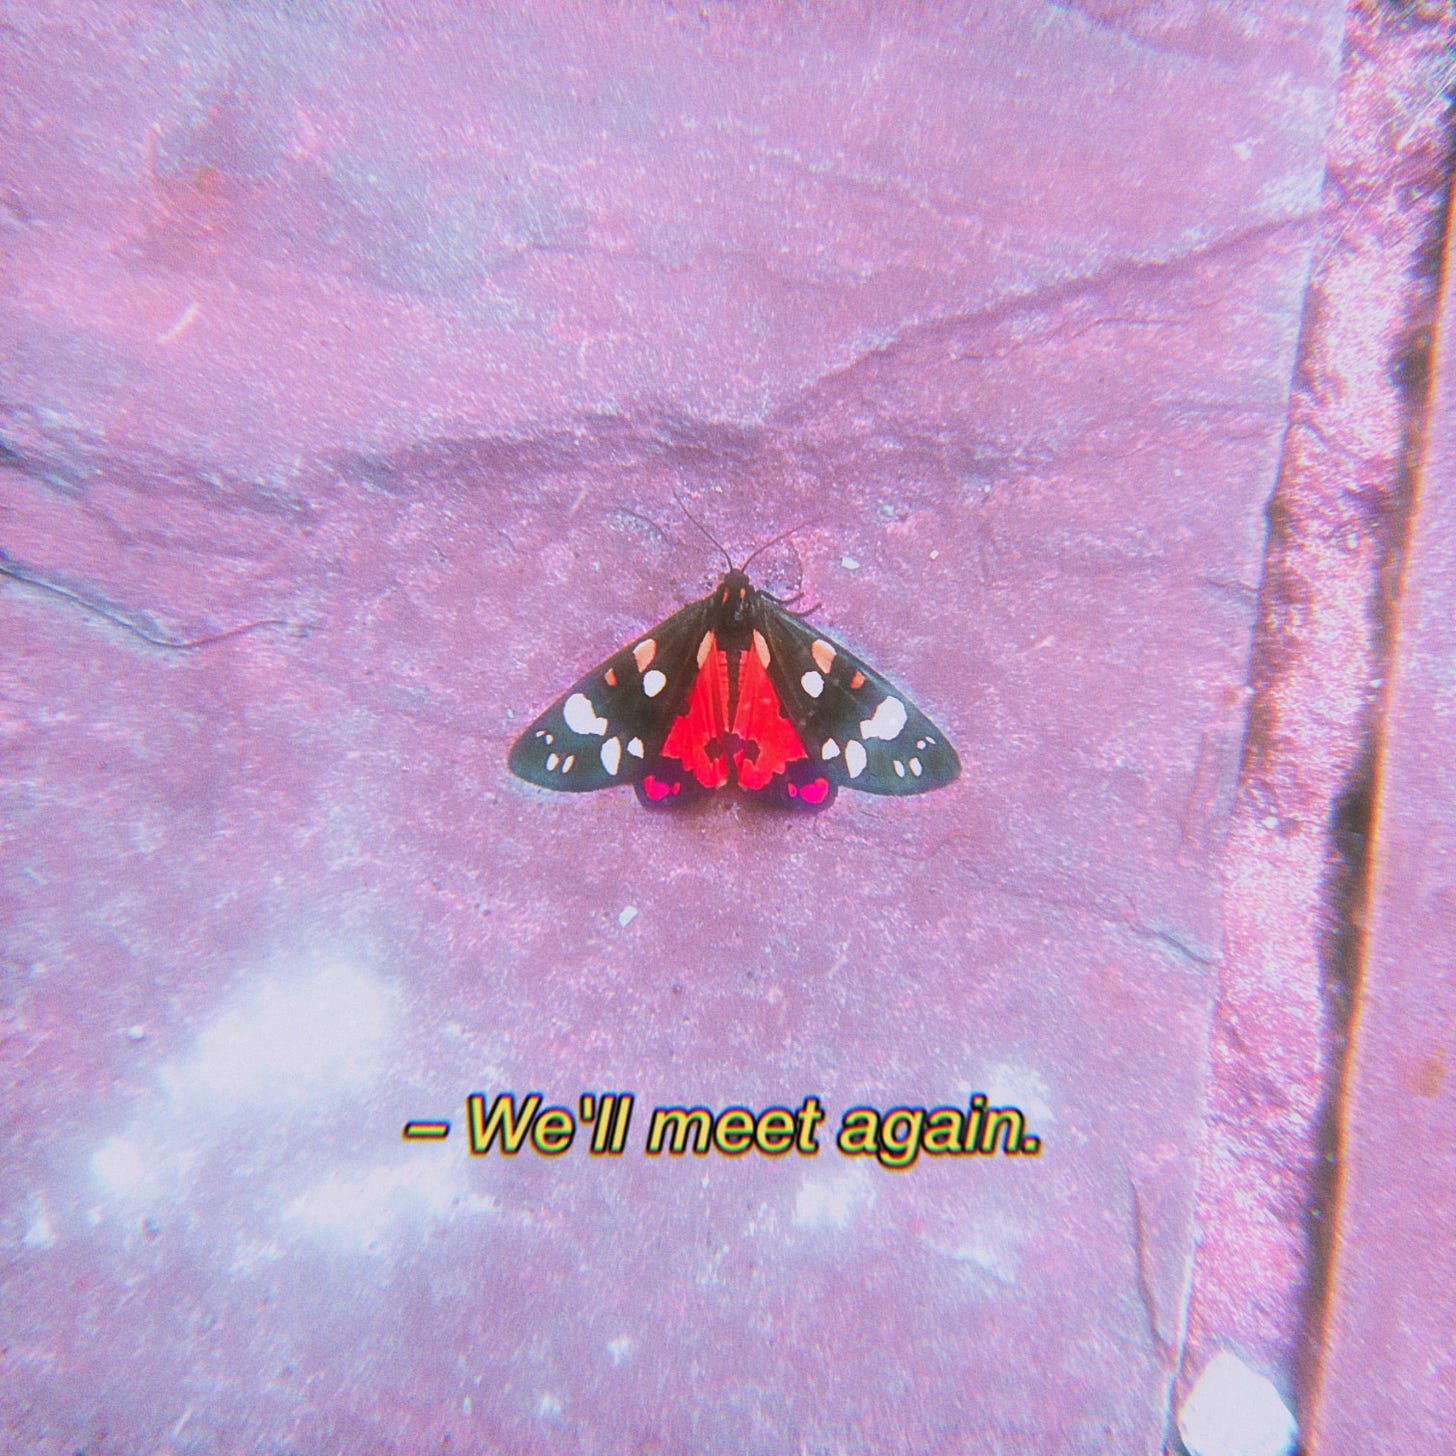 Grainy photo of a colourful moth with caption we'll meet again